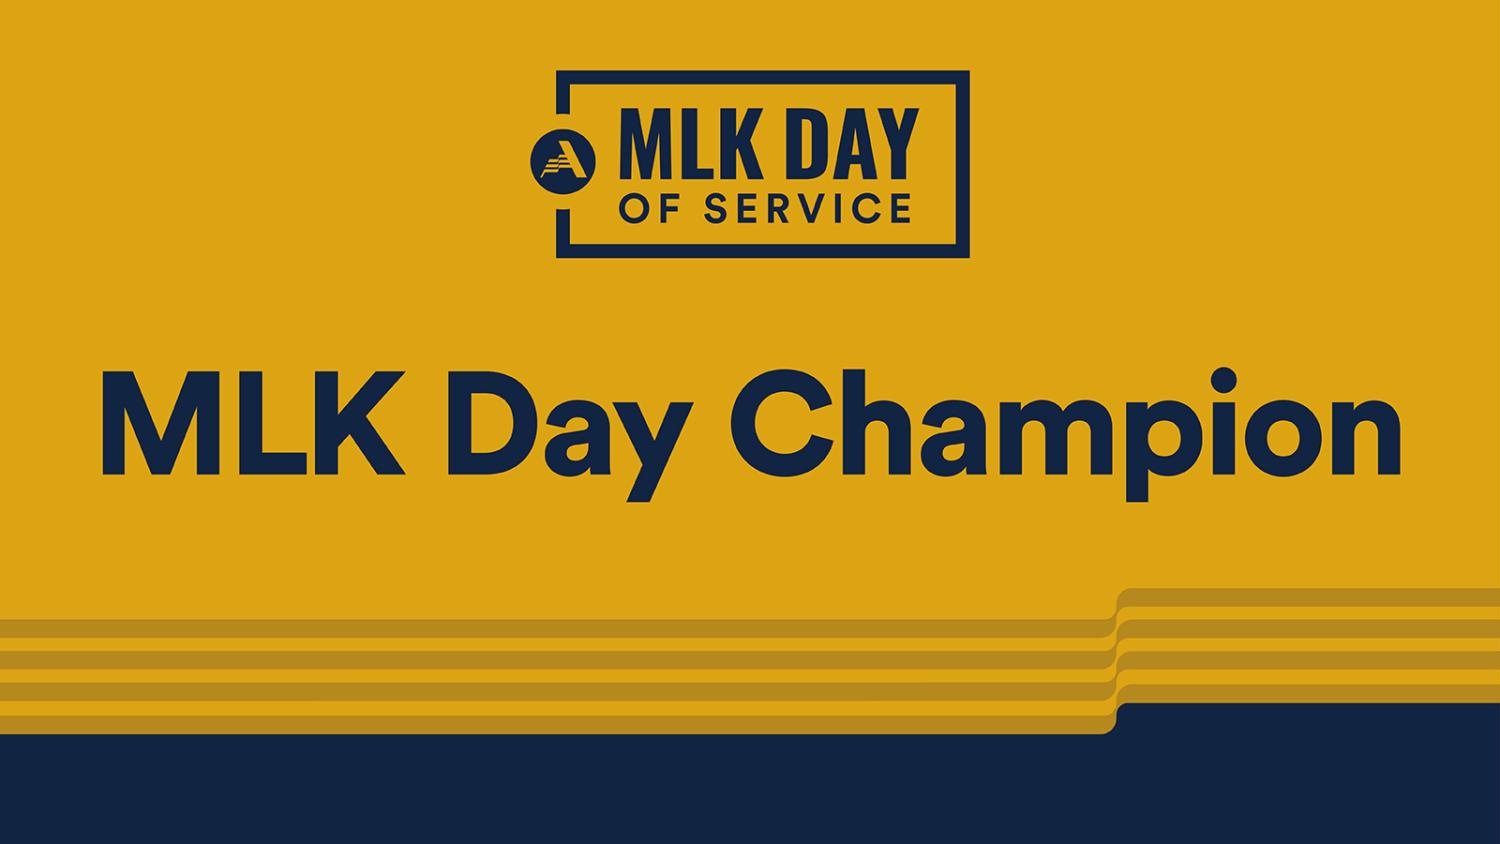 Become an MLK Day Champion